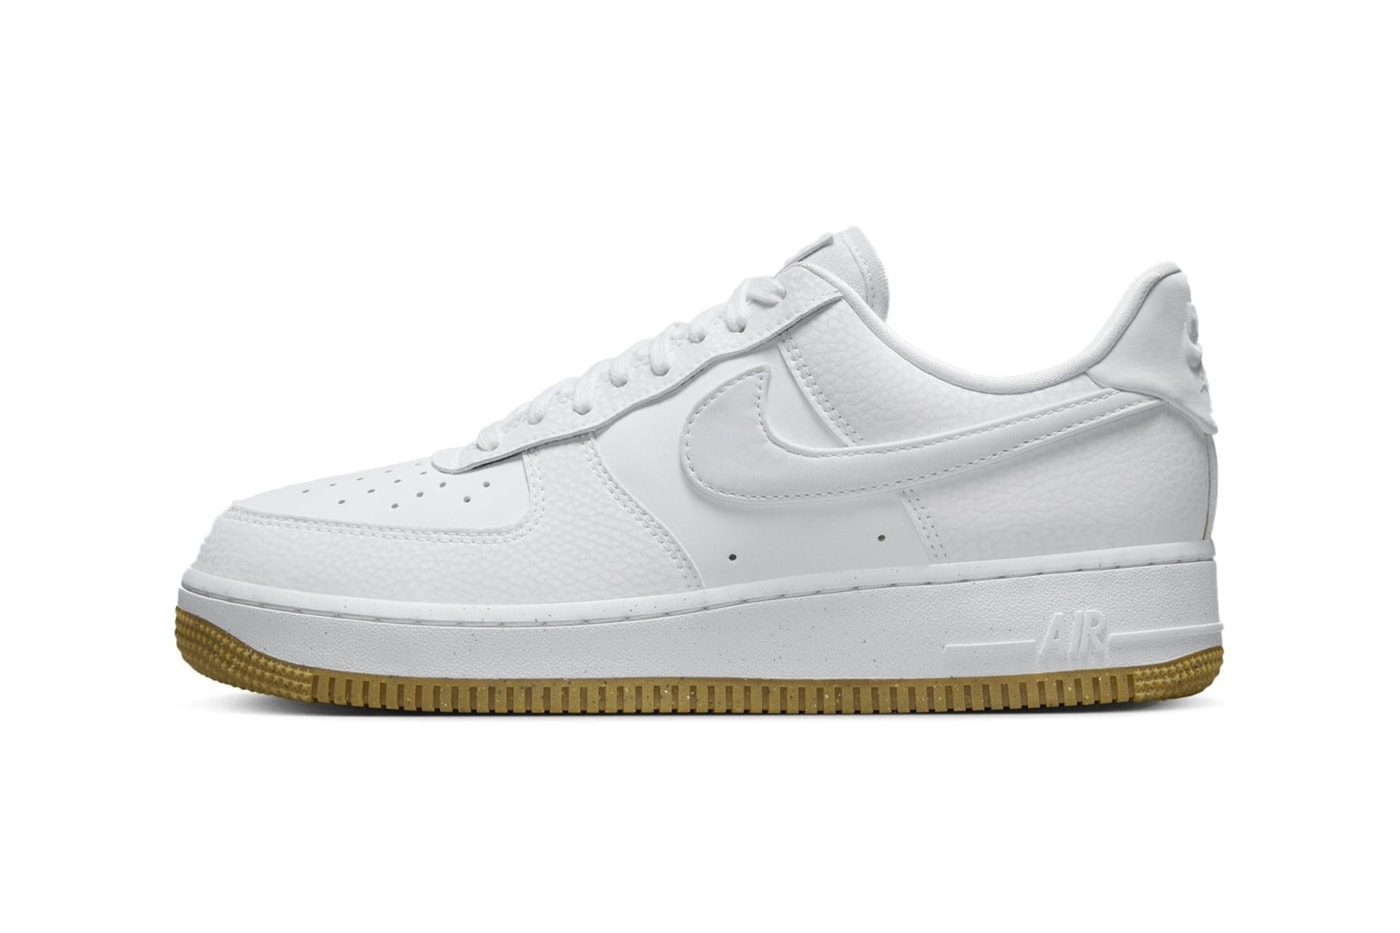 https%3A%2F%2Fhypebeast.com%2Fimage%2F2024%2F01%2Fnike-air-force-1-low-next-nature-white-gum-fn6326-100-release-info-001.jpg